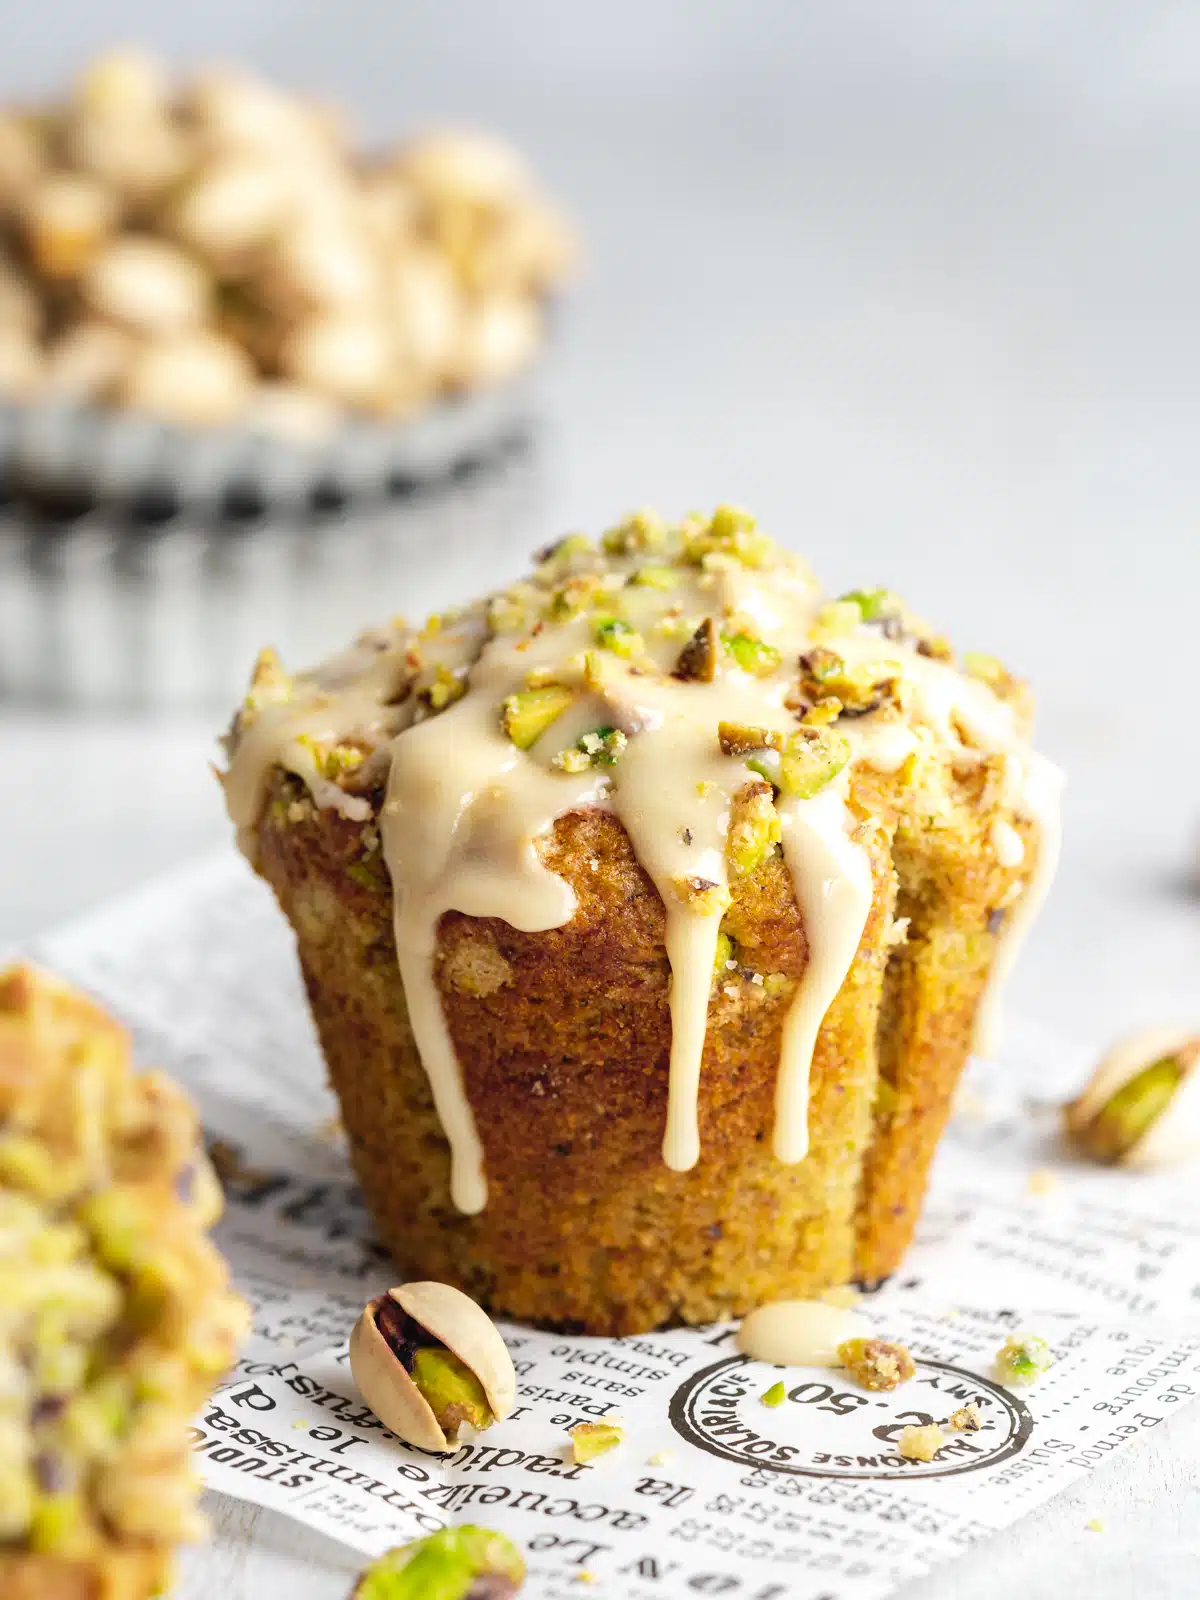 a pistachio muffin with pistachio crumble topping and vanilla glaze poured over the top.